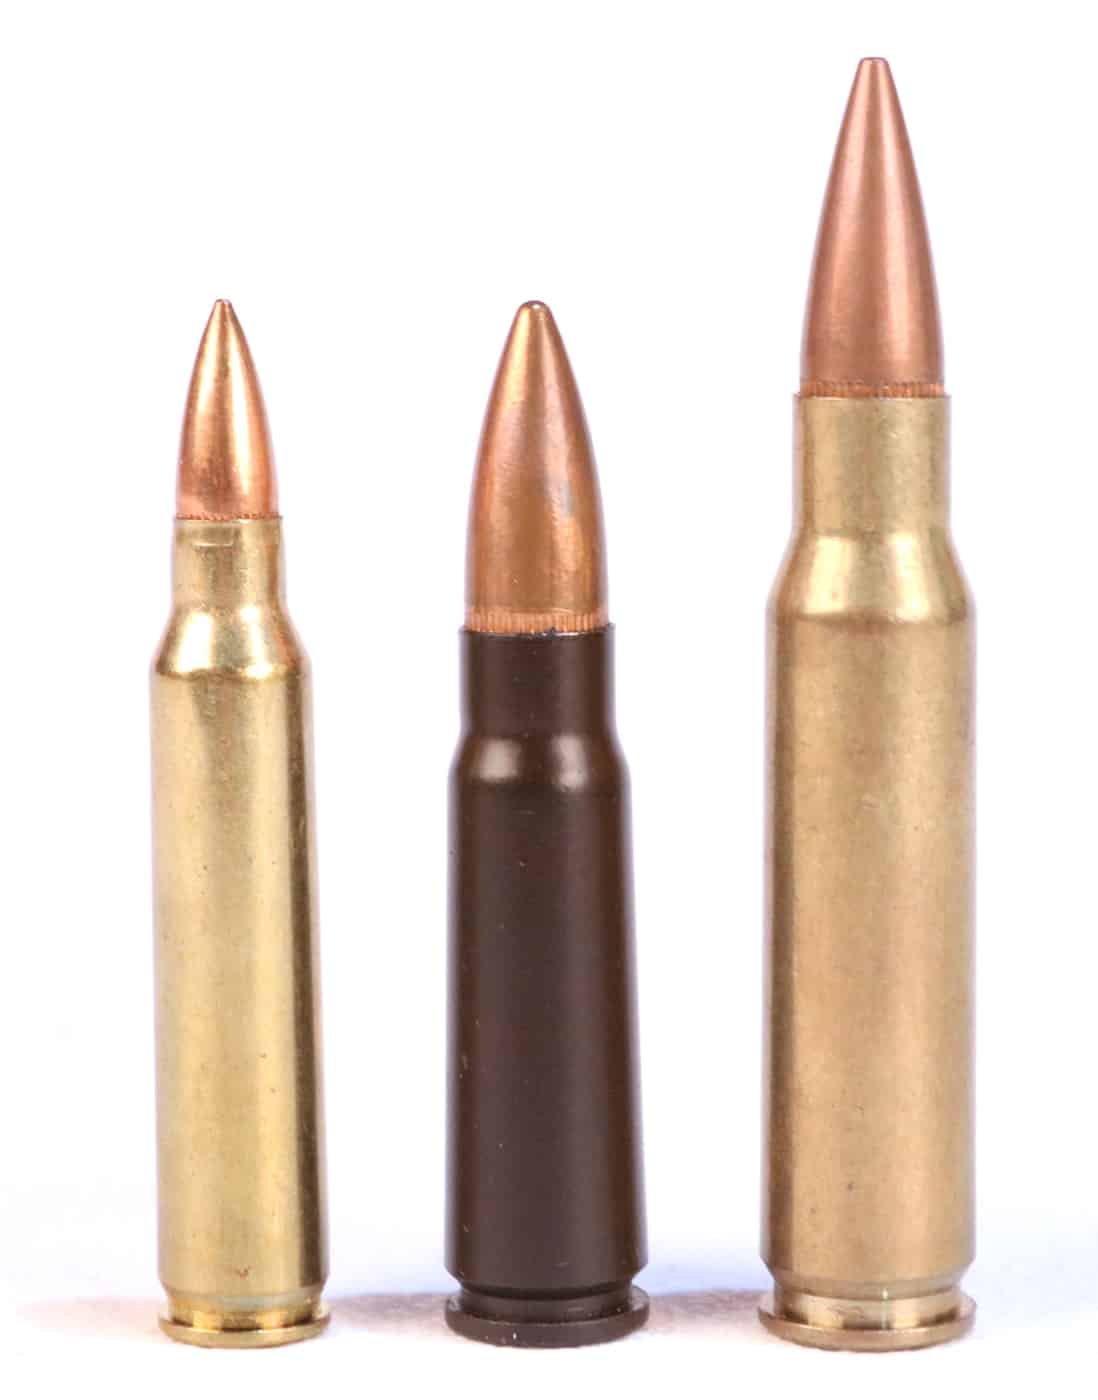 In this photo, we see SKS ammunition compared to the .308 and 5.56 ammo. Ammunition is the material fired, scattered, dropped, or detonated from any weapon or weapon system. Ammunition is both expendable weapons and the component parts of other weapons that create the effect on a target.